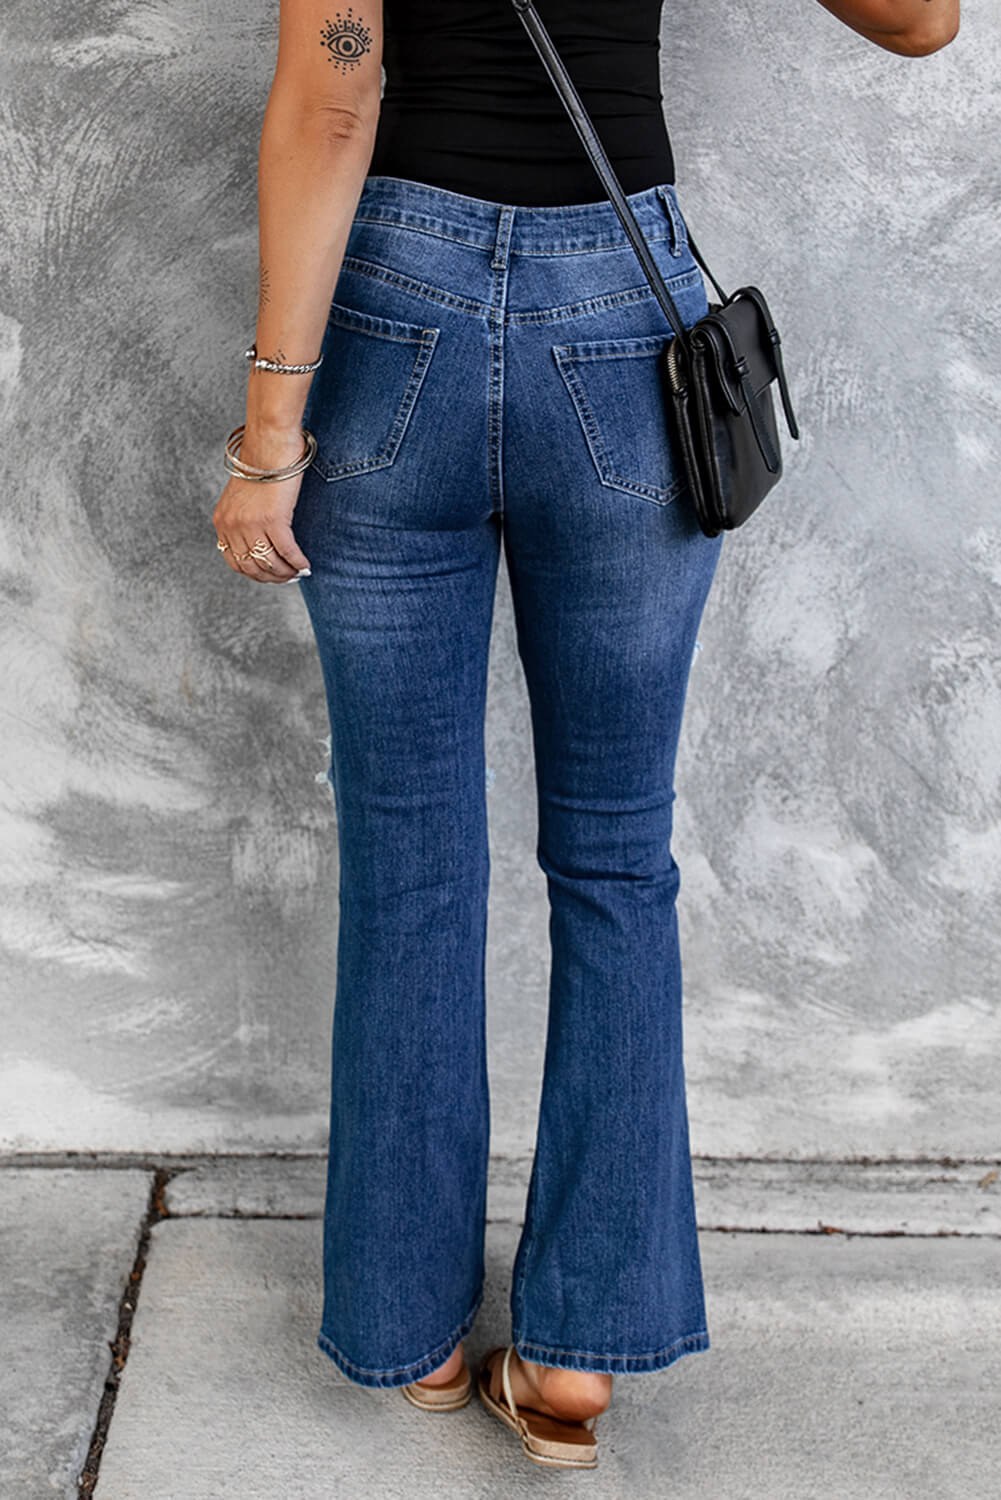 Distressed High Waist Flare Jeans Pants